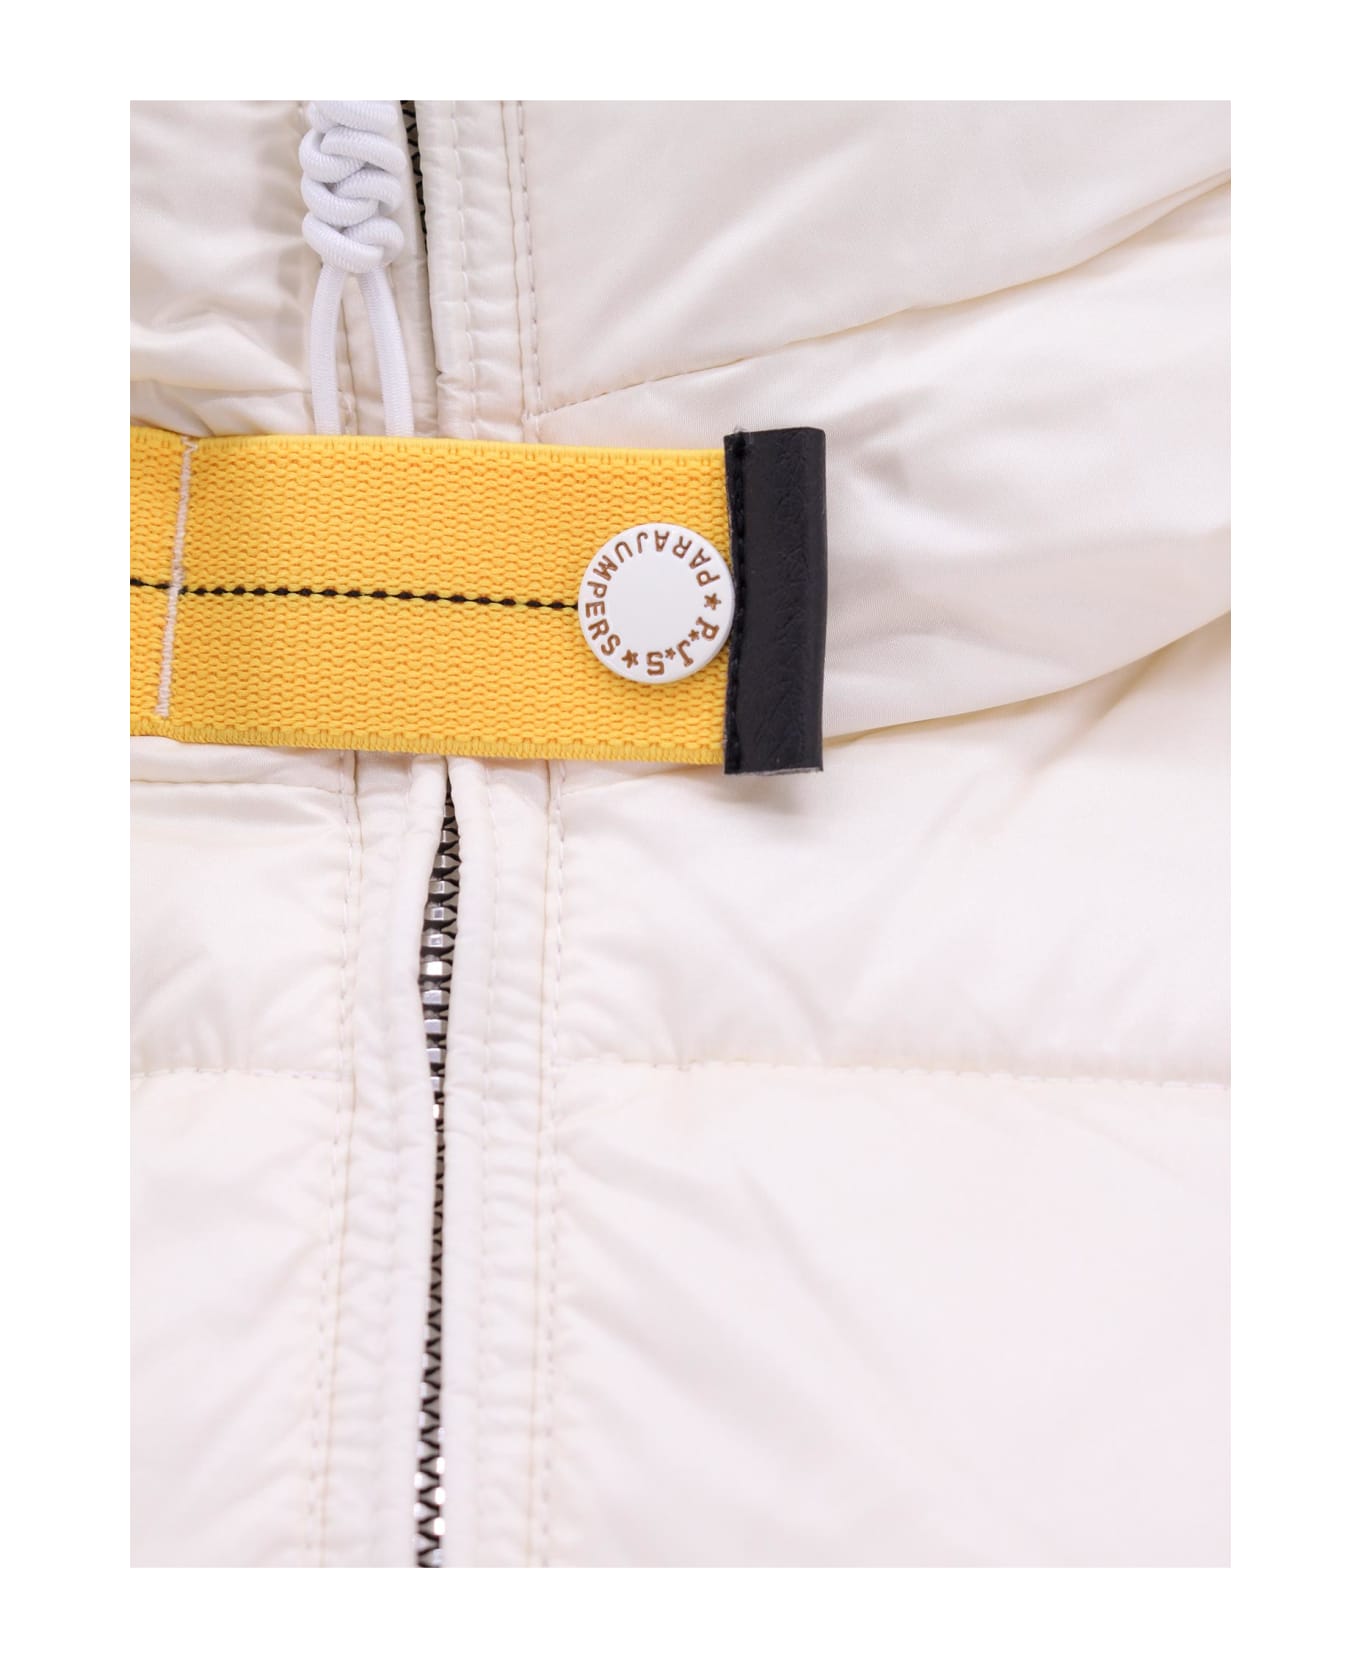 Parajumpers Tilly Jacket - White